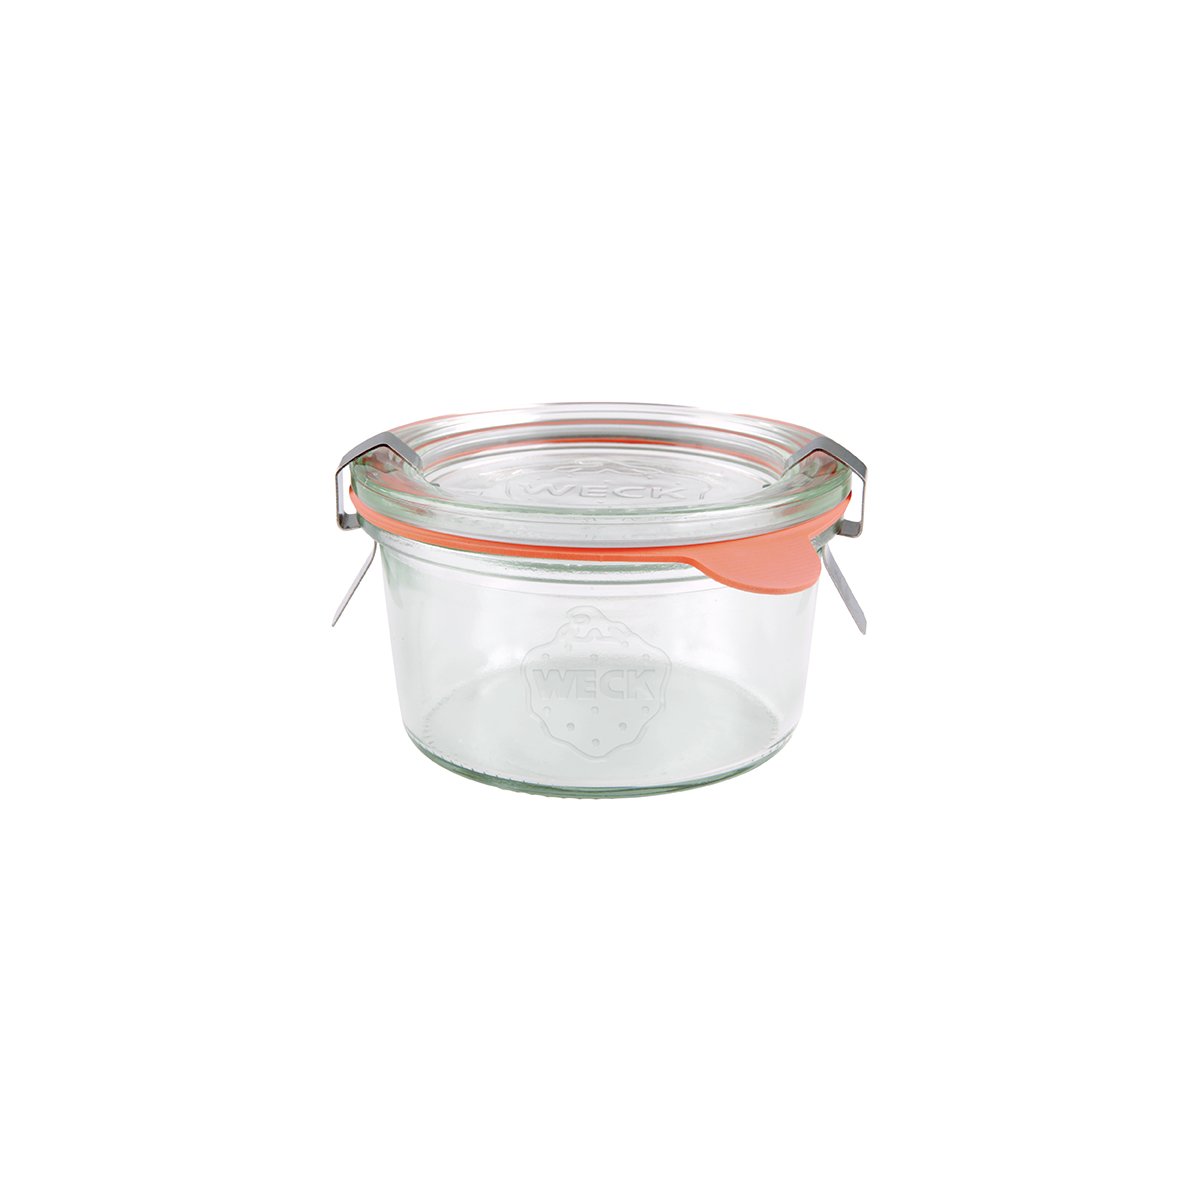 9982372 Weck Complete Glass Jar with Lid & Seal 80x47mm / 165ml Tomkin Australia Hospitality Supplies